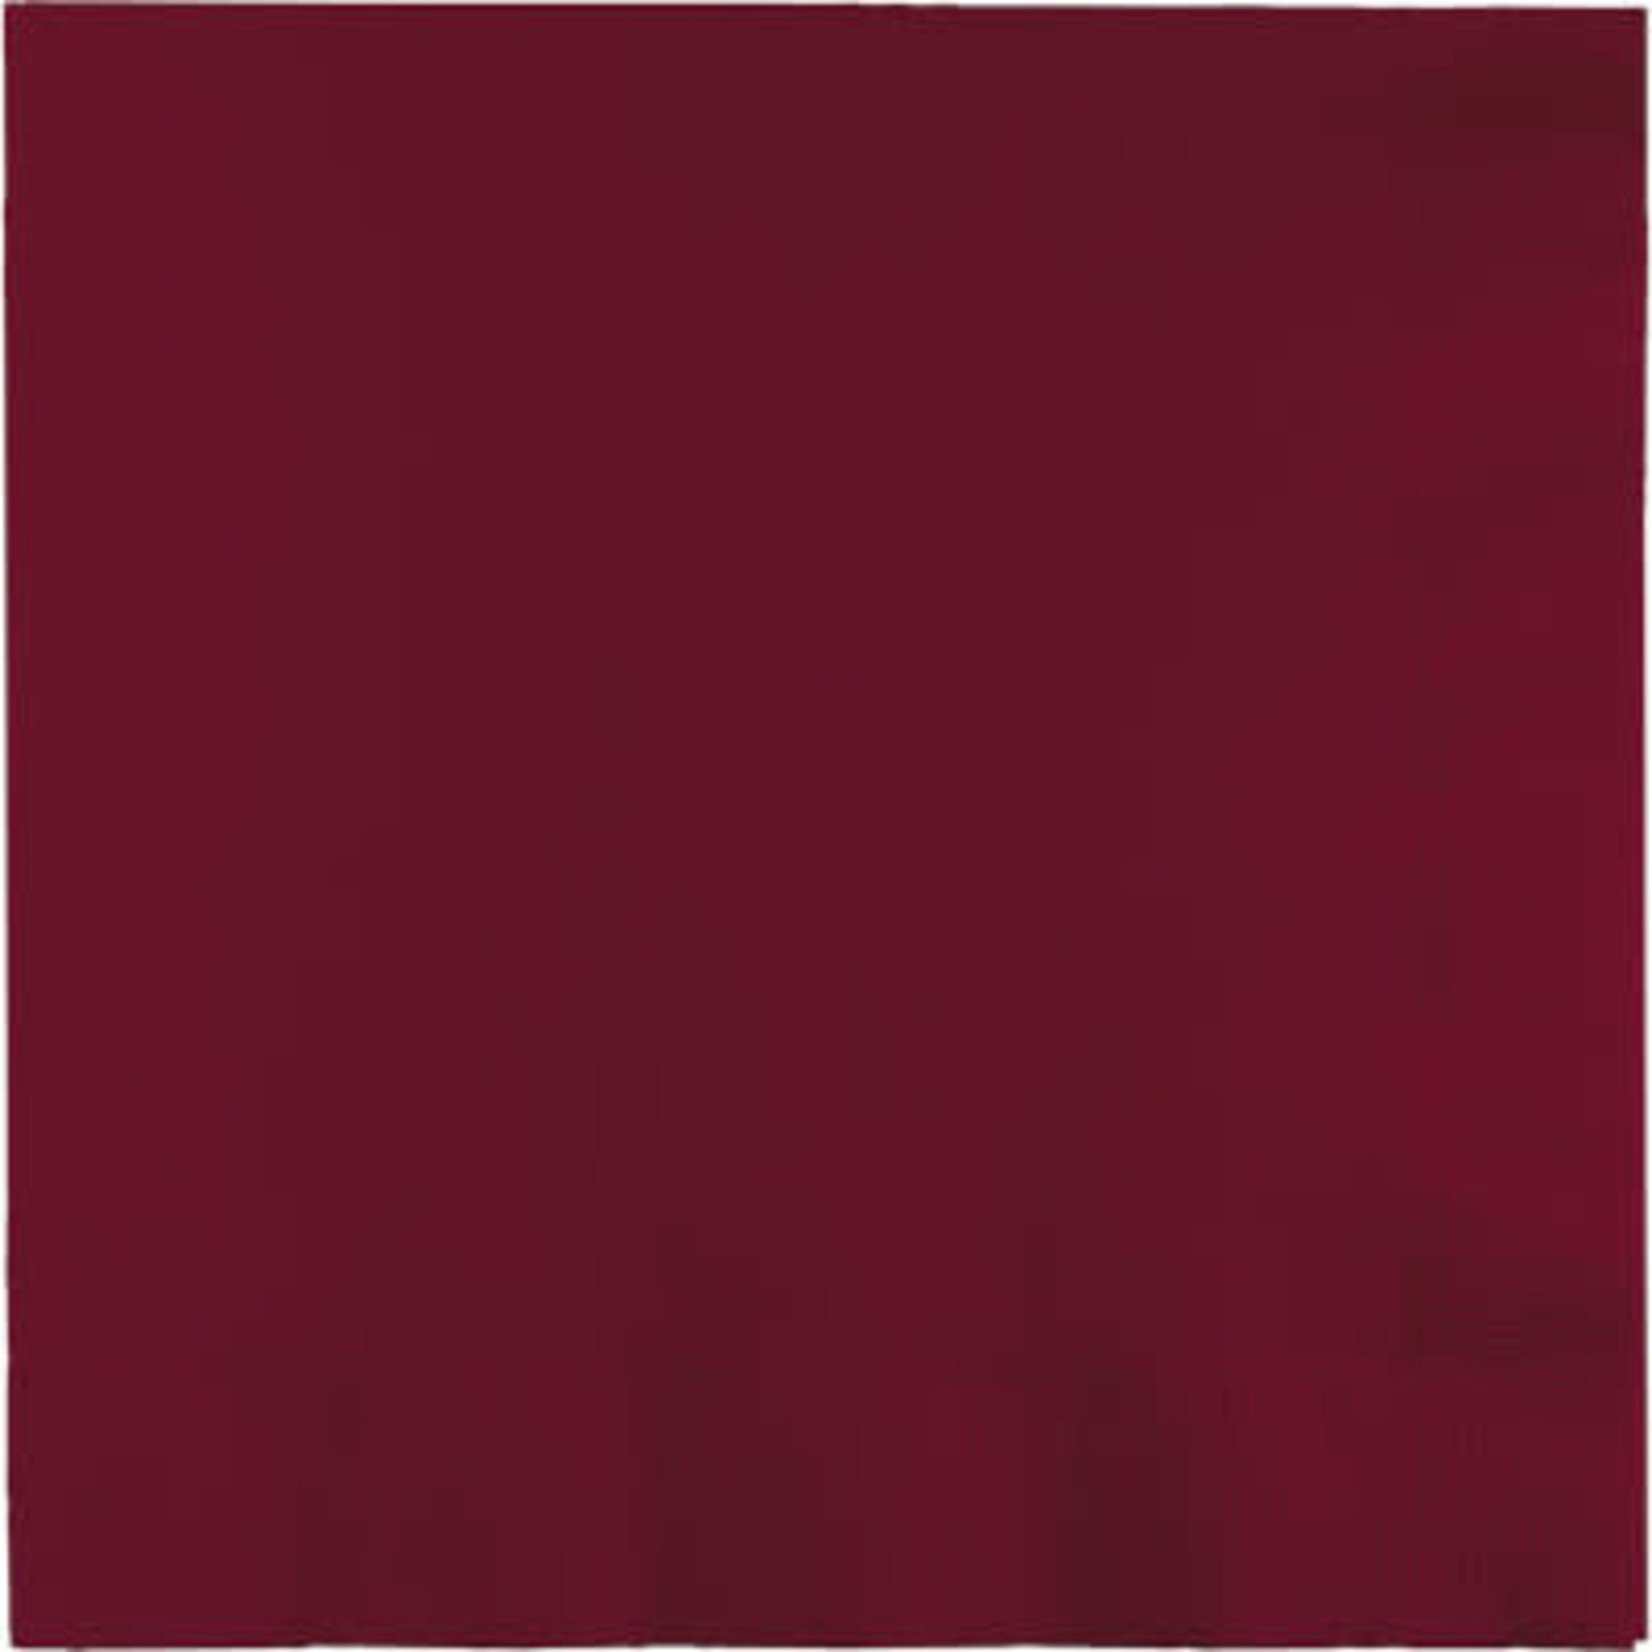 Touch of Color Burgundy 2-Ply Lunch Napkins - 50ct.